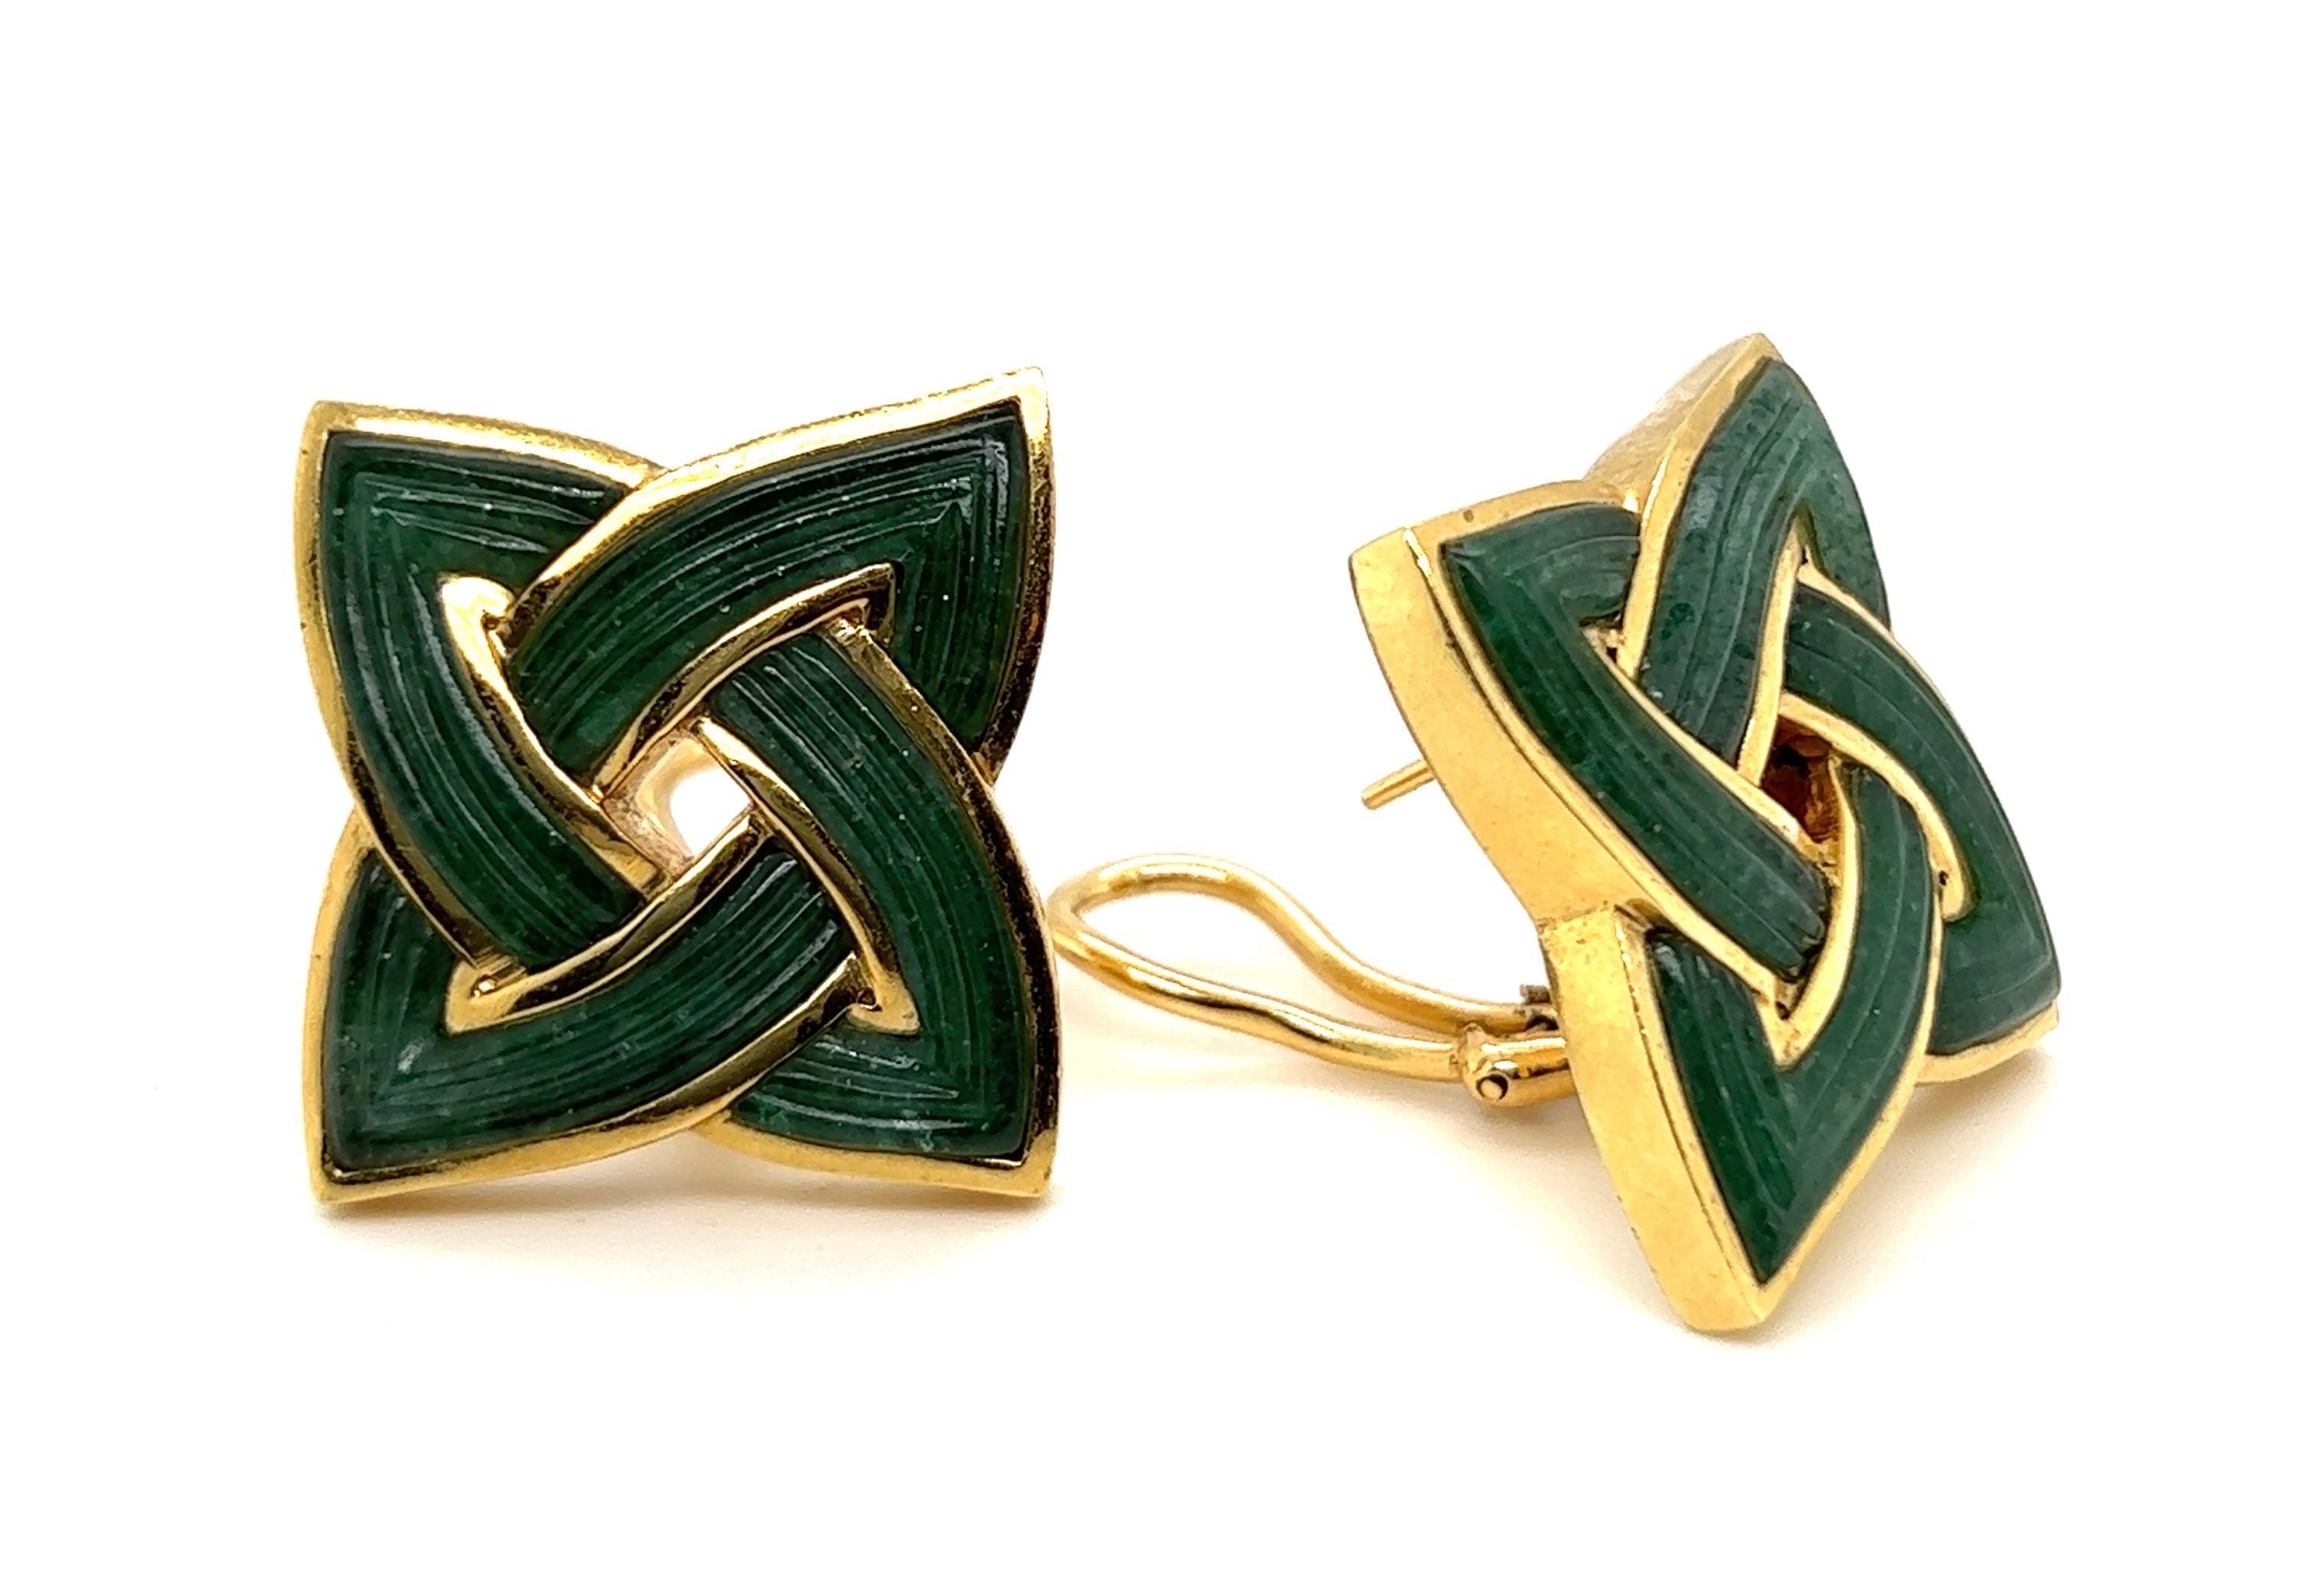 Very stylish 18 karat yellow gold and jade Celtic knot earrings by Angela Cummings, 1988.
Each designed as a stylized Celtic knot consisting in two intetwined navette motifs and set with fluted green jade inlays. The earrings are completed by posts